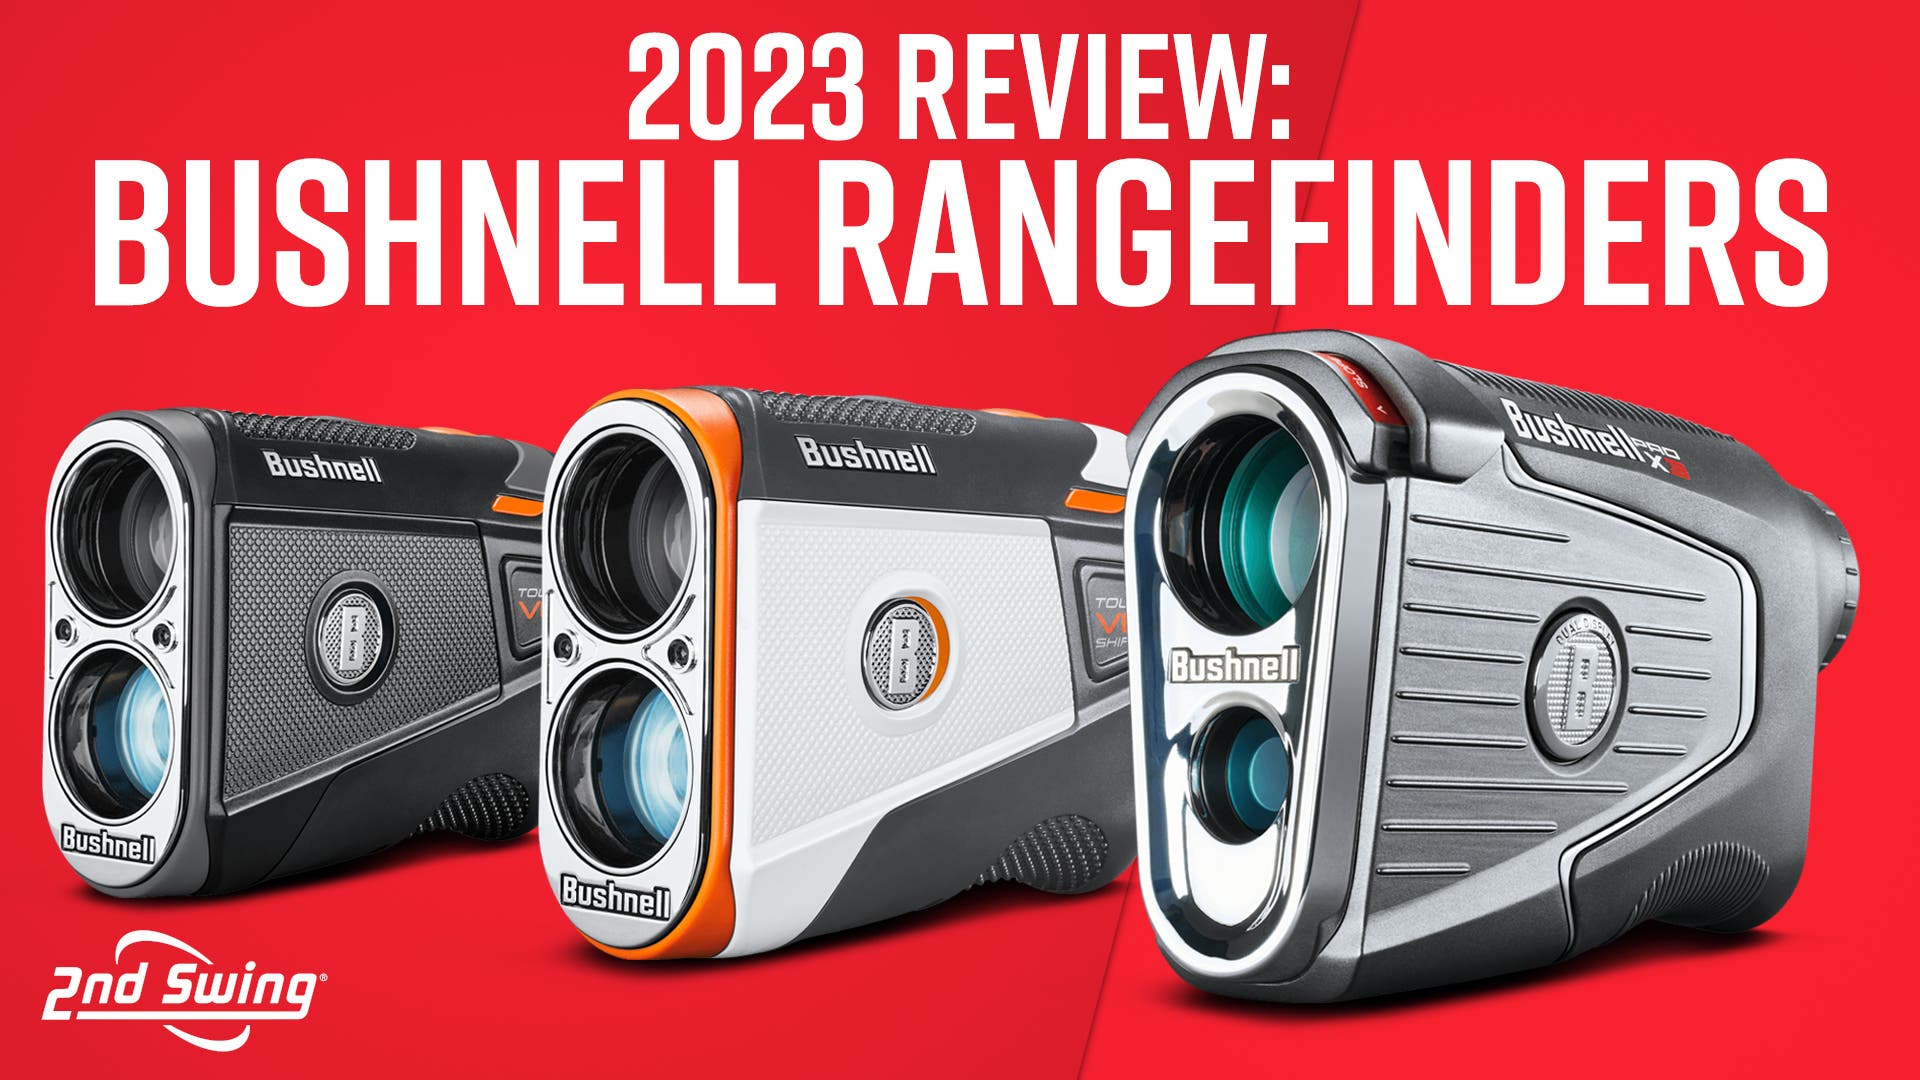 Bushnell's 2023 Rangefinders stress precision and accuracy